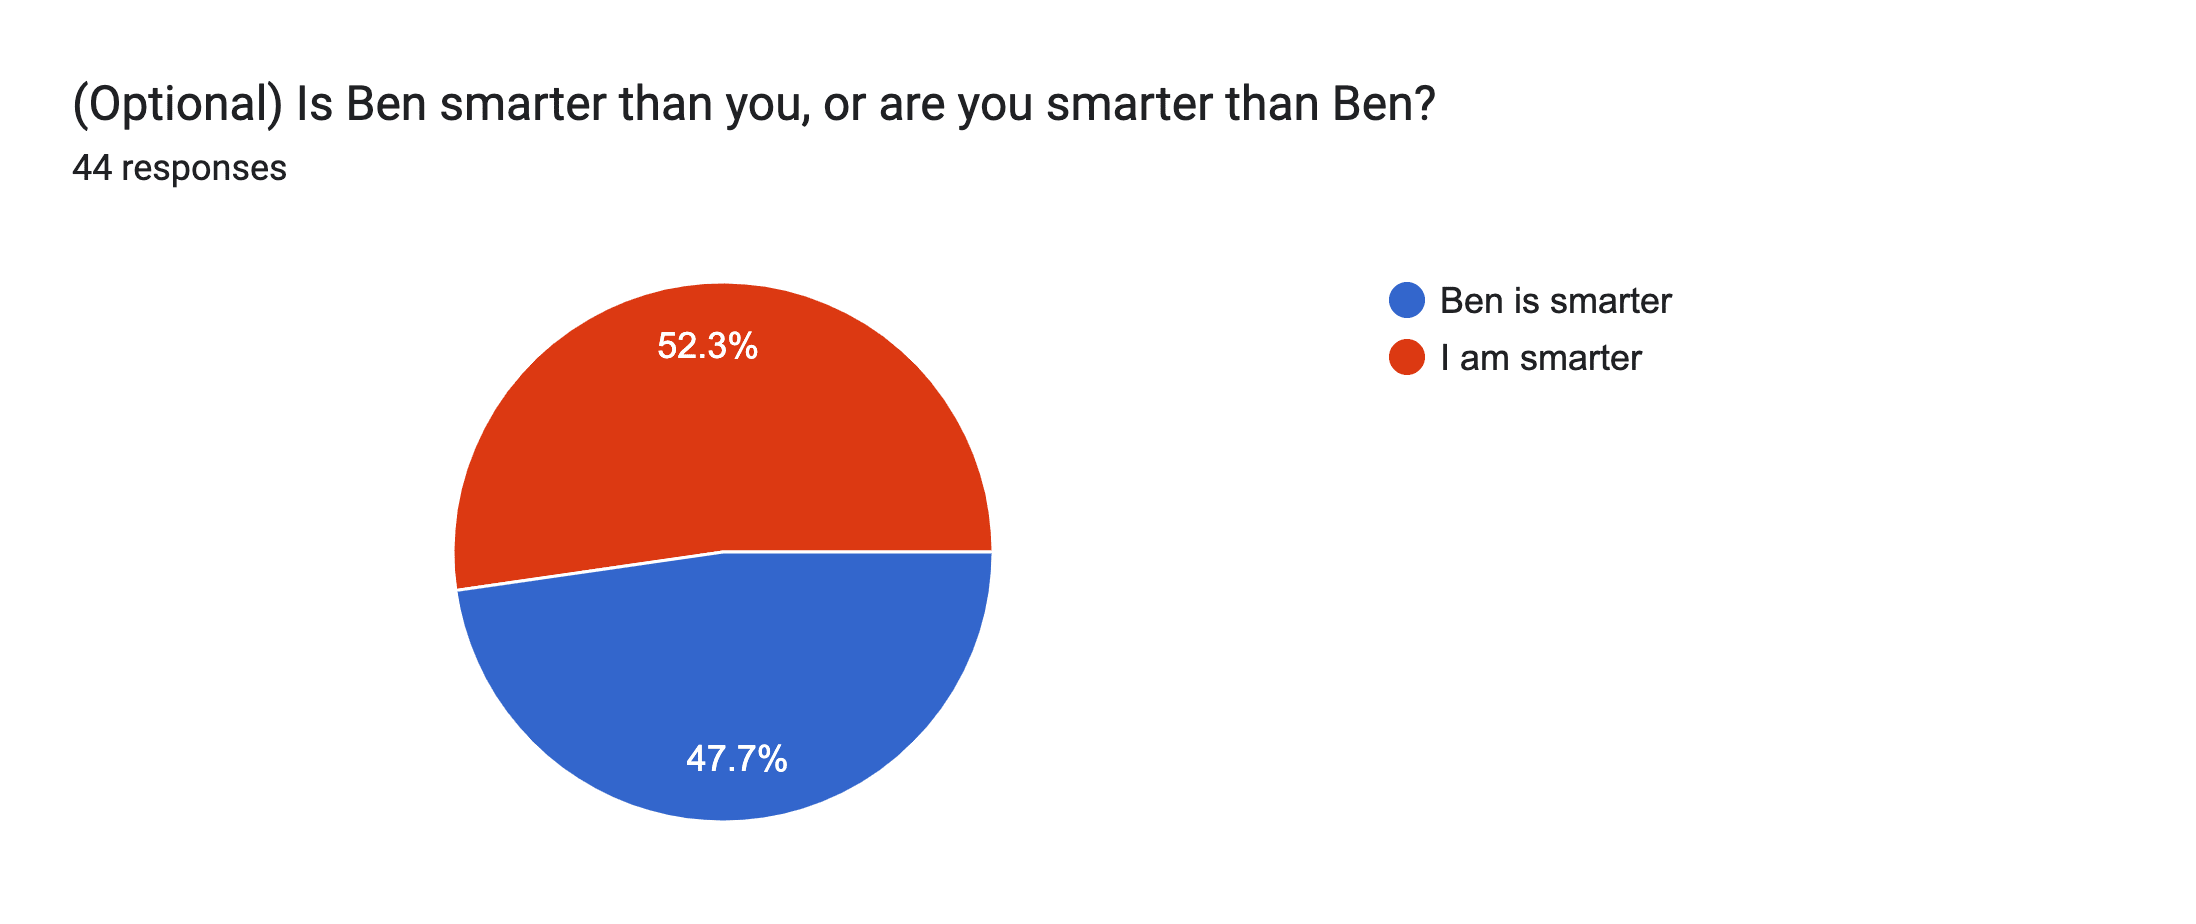 Forms response chart. Question title: (Optional) Is Ben smarter than you, or are you smarter than Ben?. Number of responses: 44 responses.